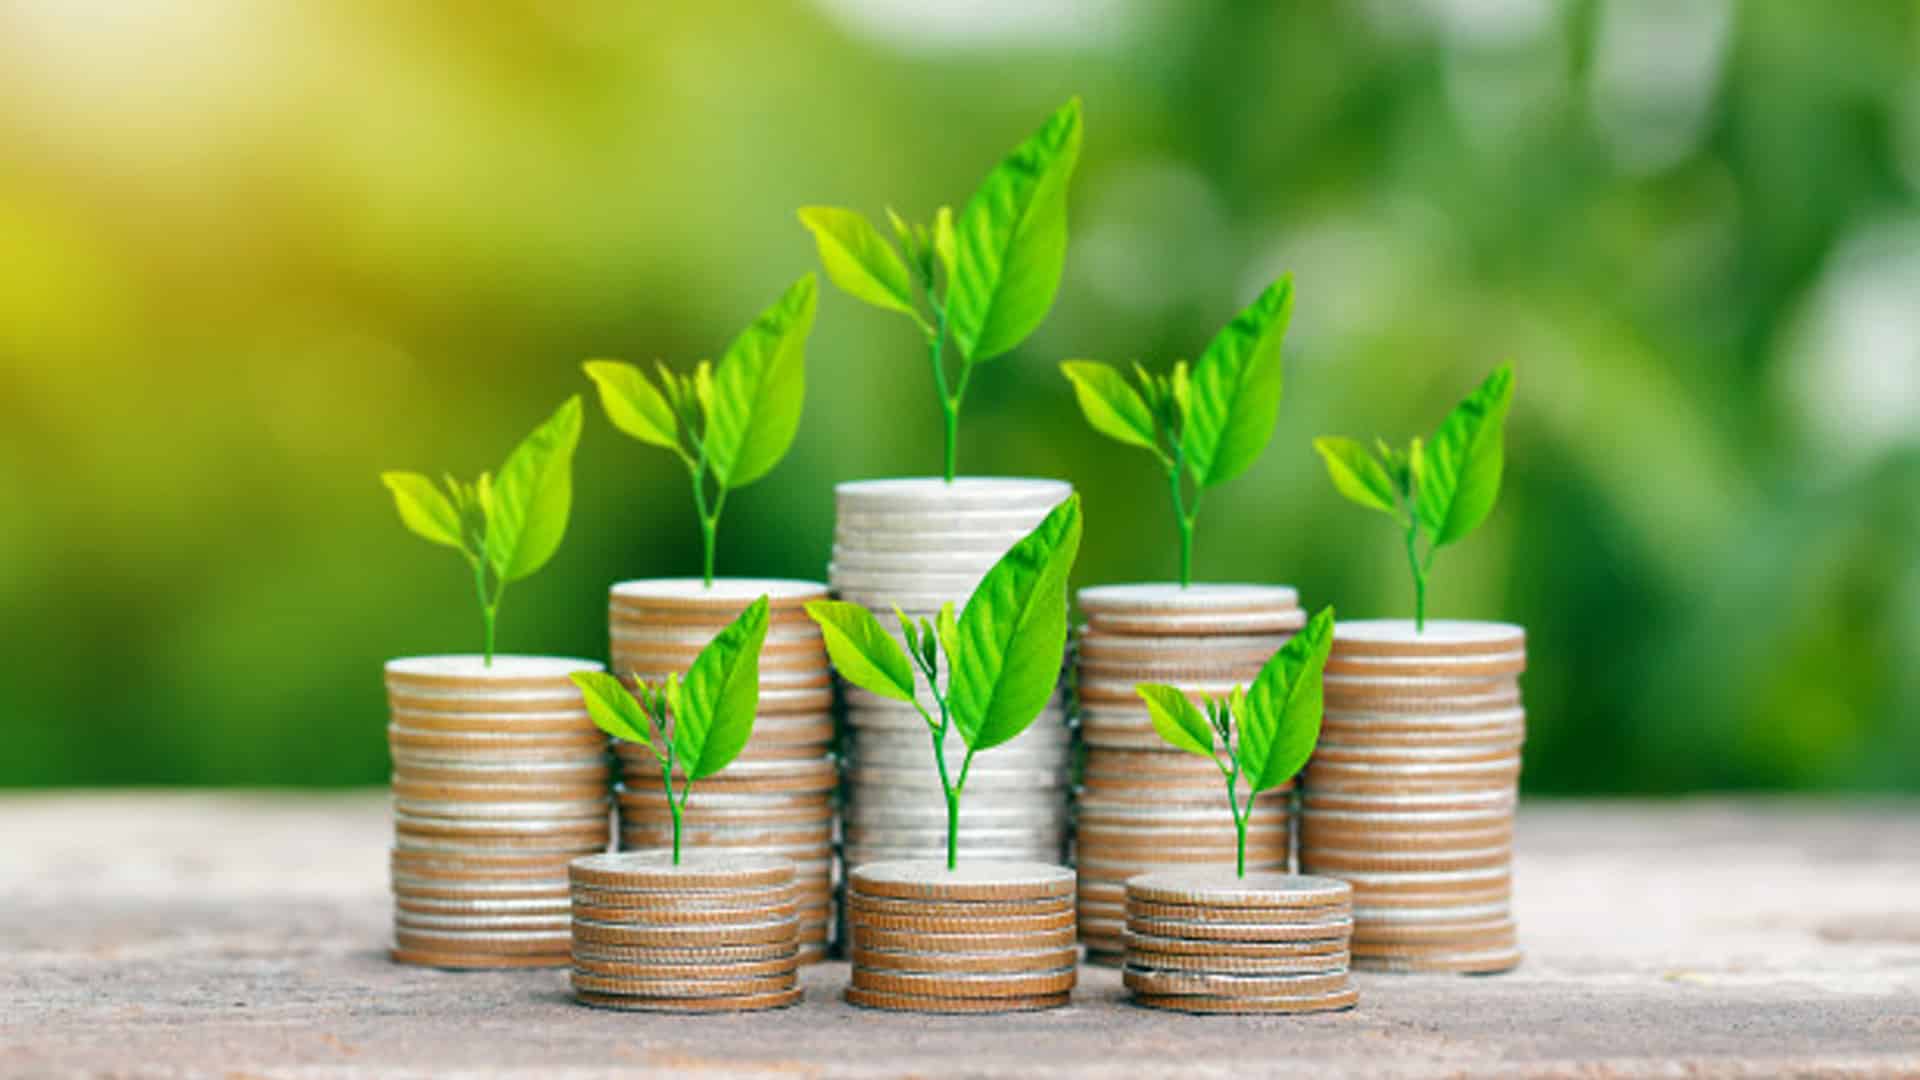 New Investment to Support Green Finance for Micro, Small and Medium Businesses in India